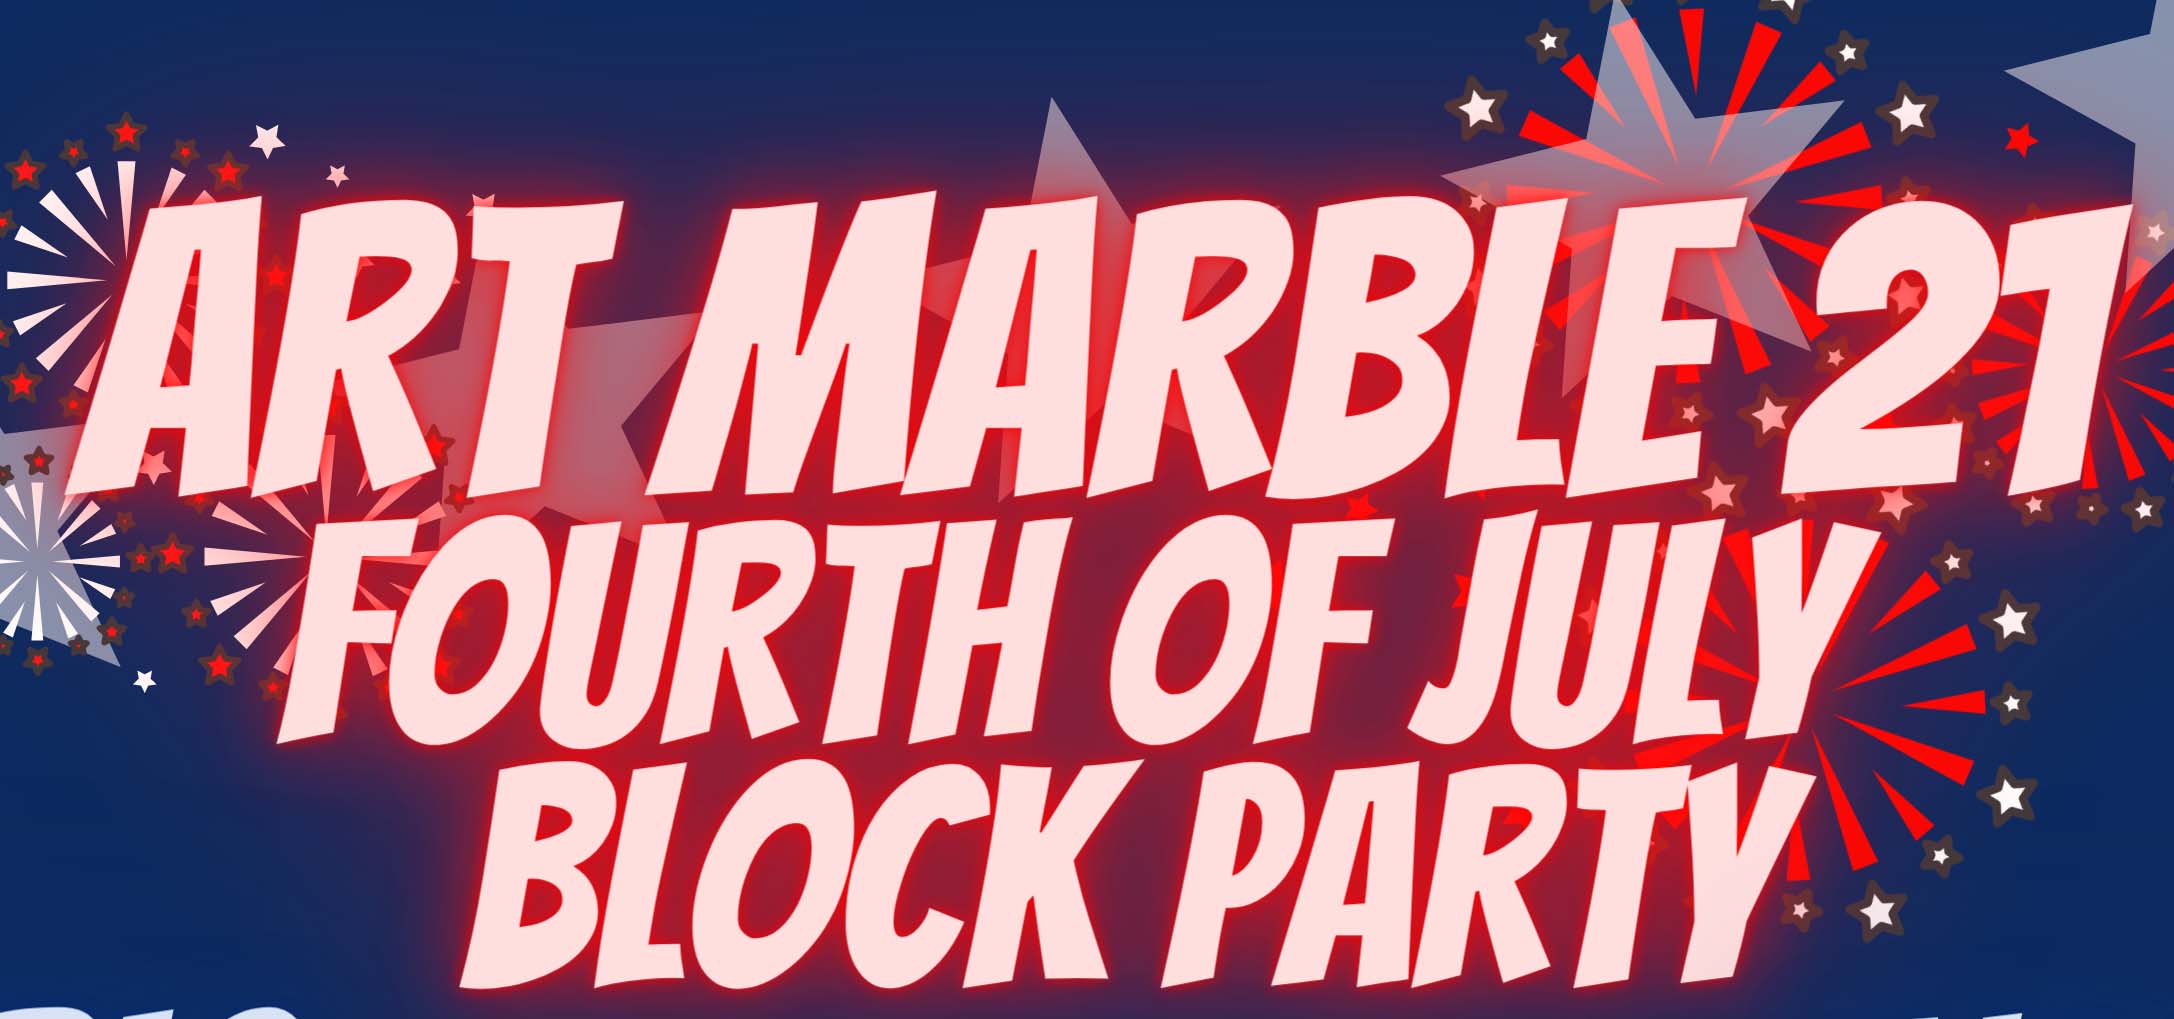 Red, white, and blue graphic for 4th of July block party.